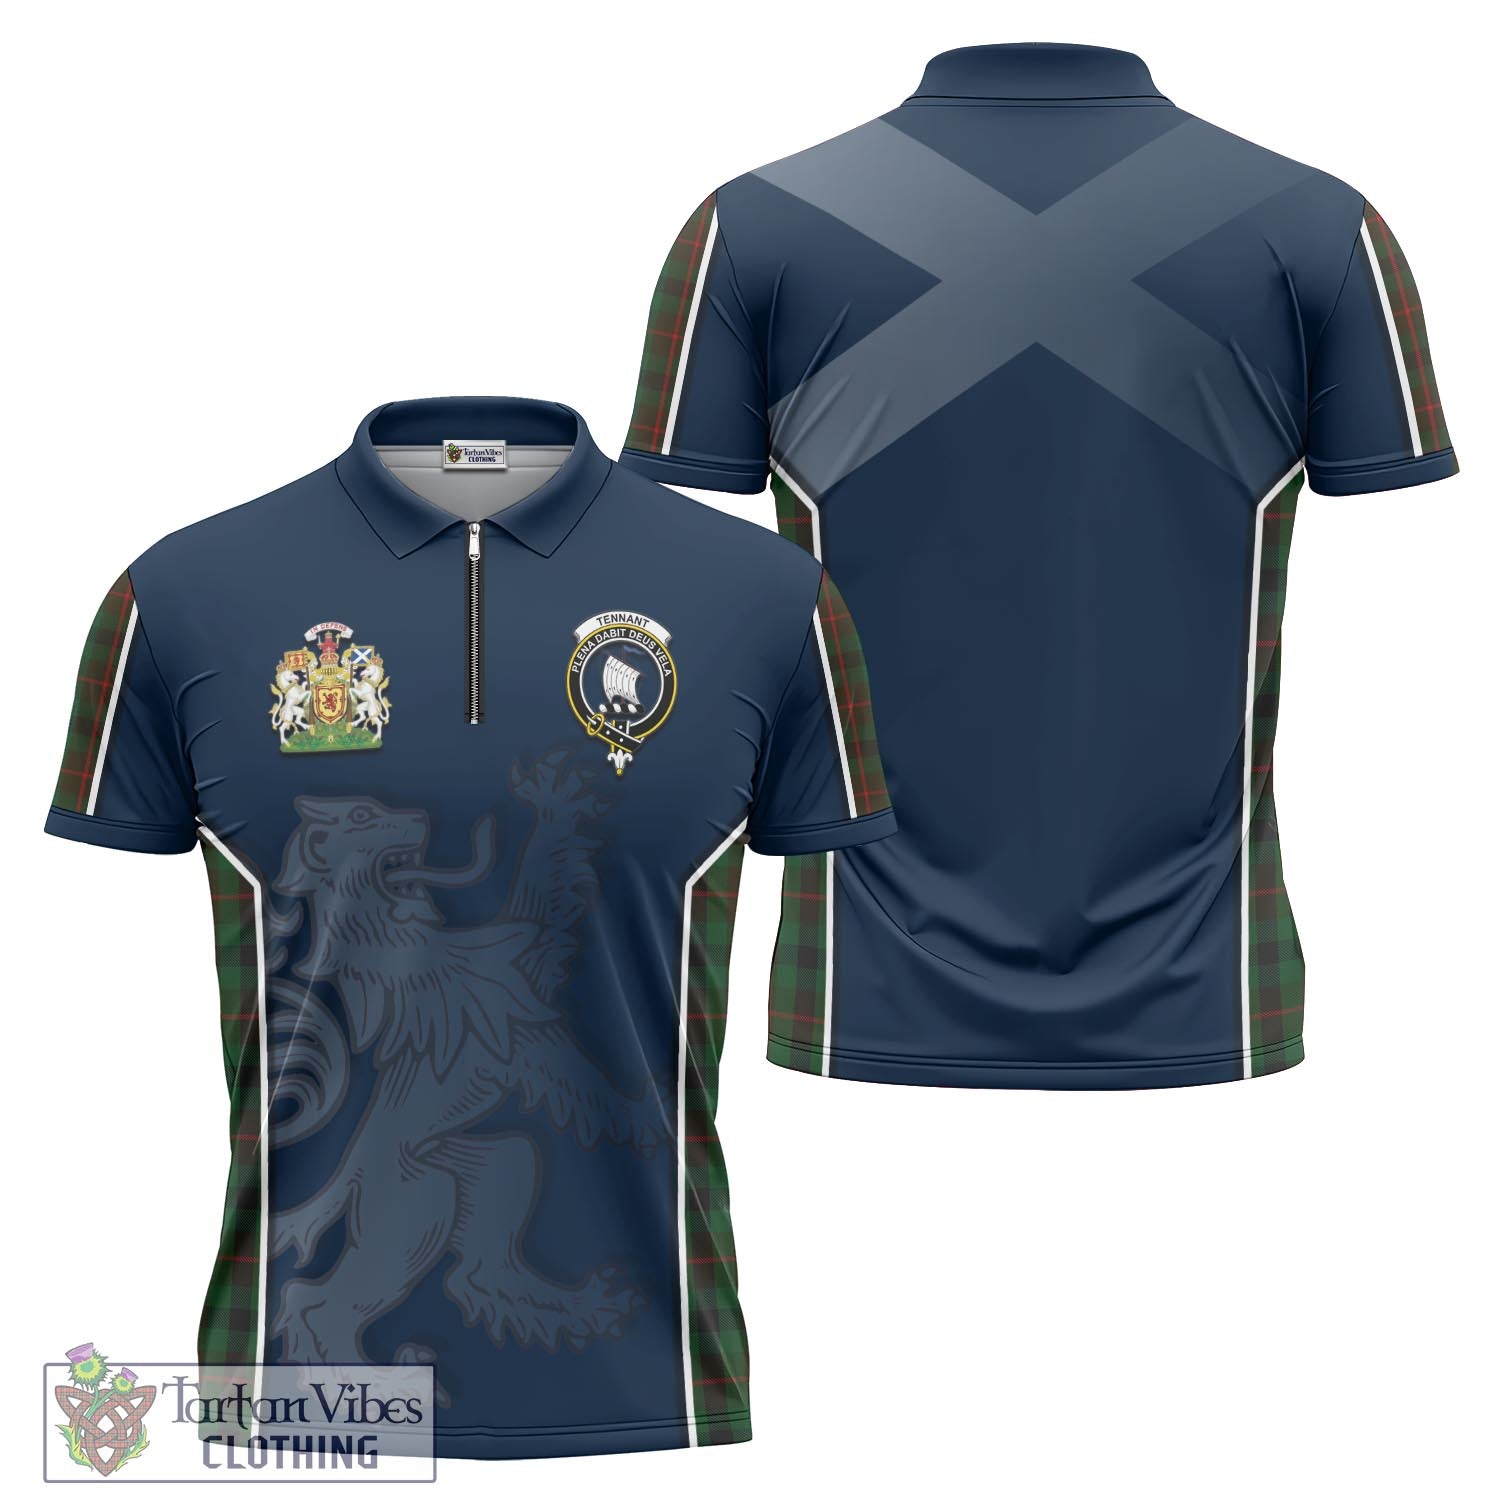 Tartan Vibes Clothing Tennant Tartan Zipper Polo Shirt with Family Crest and Lion Rampant Vibes Sport Style